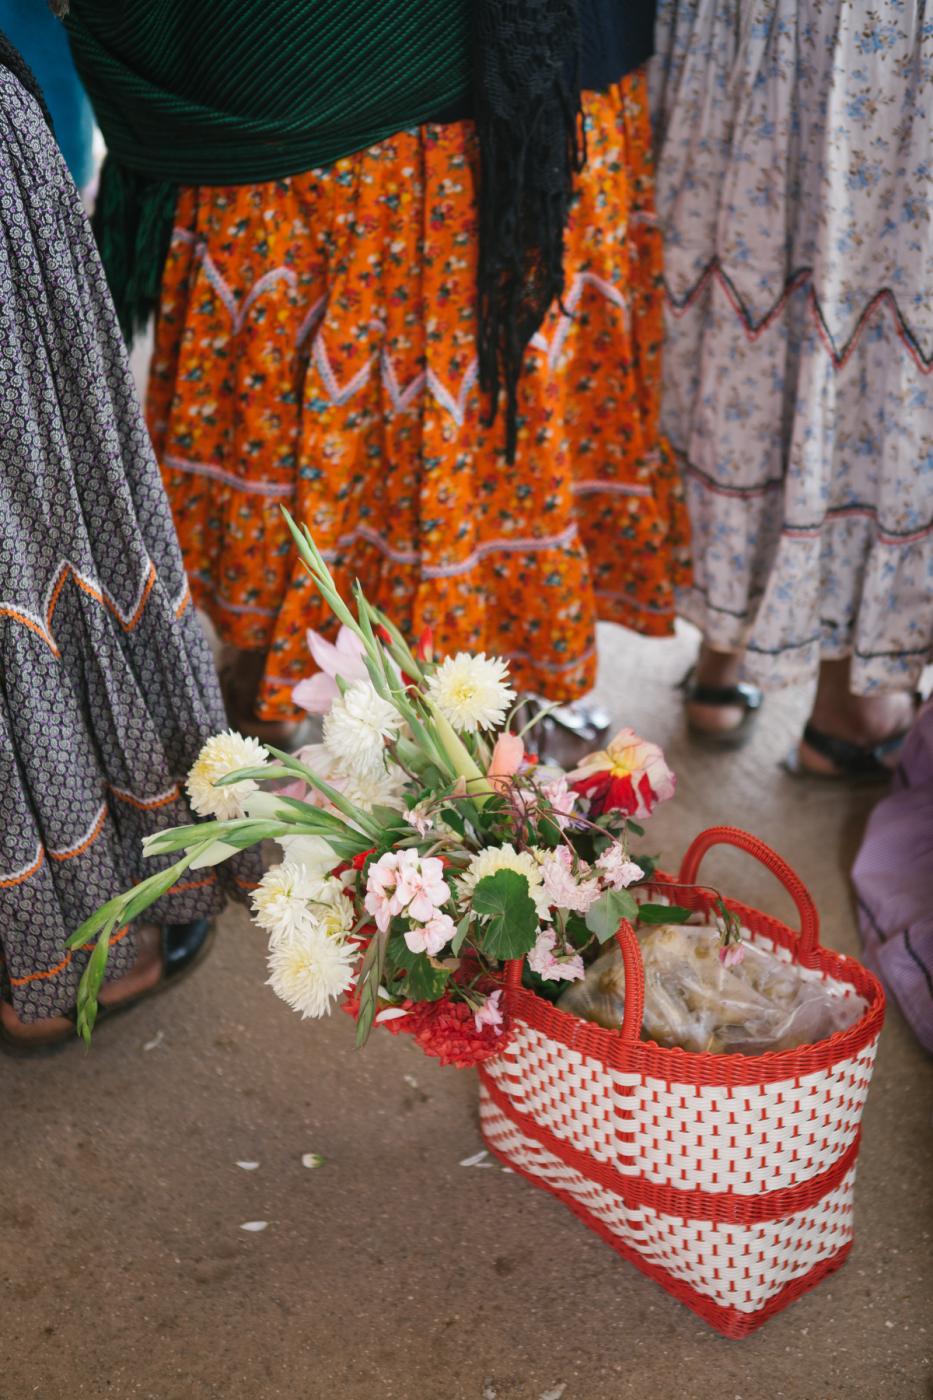 Image from Basketball in the Sierra Norte of Oaxaca - A basket of flowers in Santa Maria Tlahuitoltepec, Mexico...